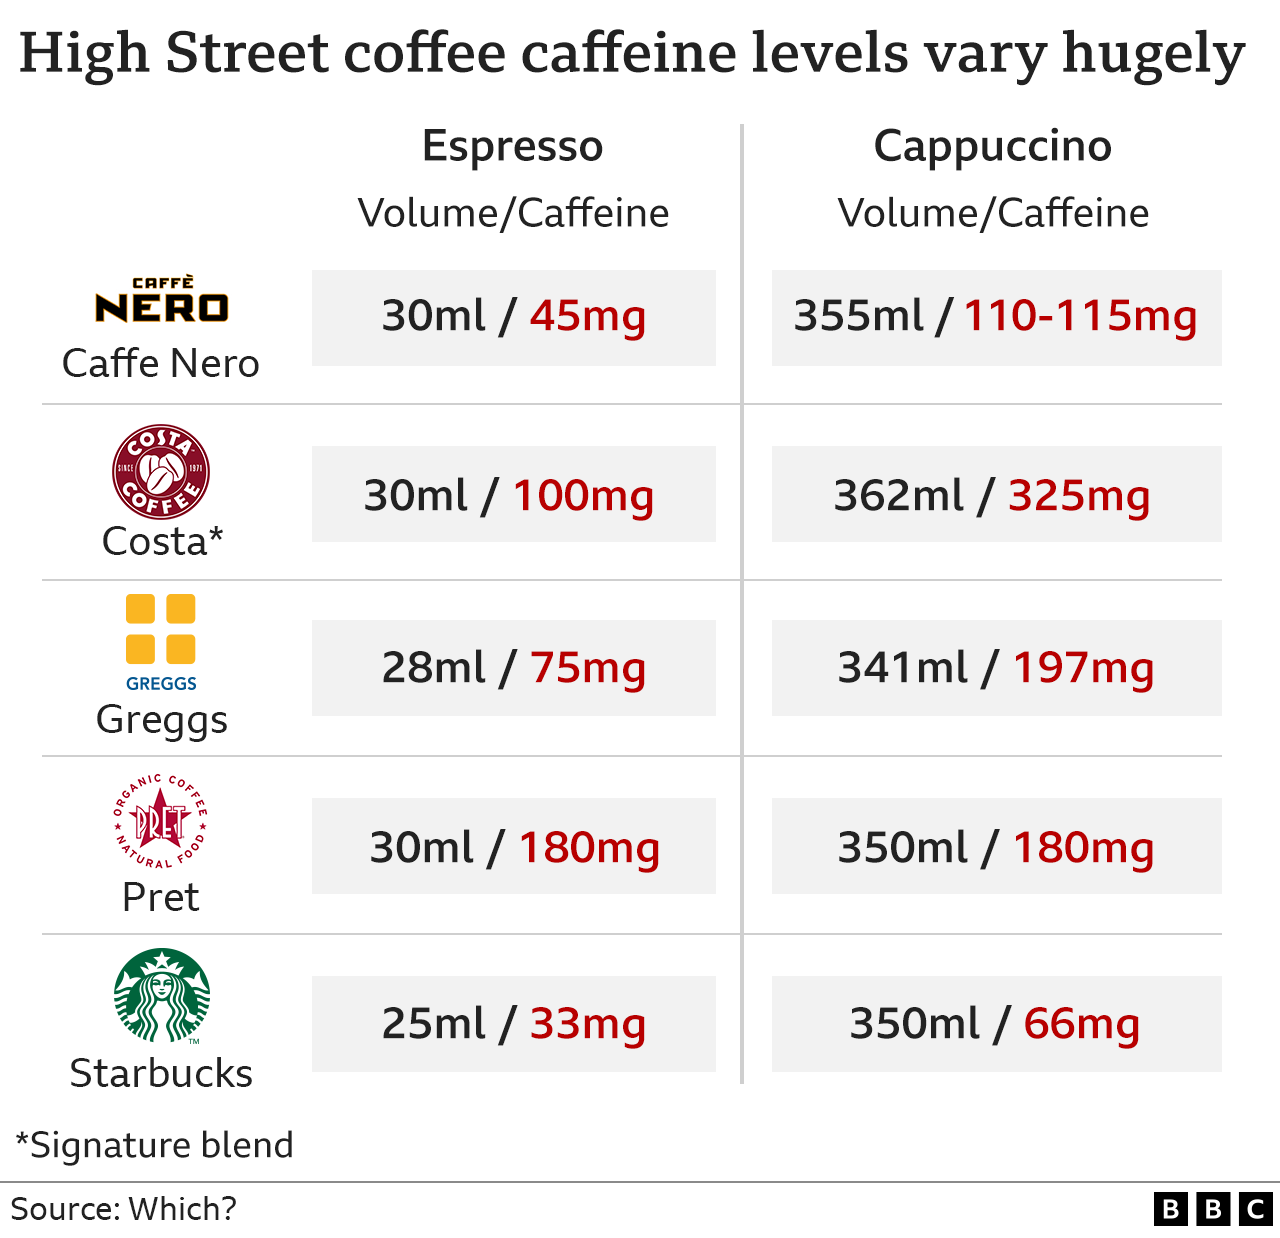 : Table showing different levels of caffeine in High Street coffee according to Which? with an espresso from Caffe Nero containing 45mg, Costa 100mg, Greggs, 75mg, Pret 180mg and Starbucks 33mg, while for a cappuccino the figures are Caffe Nero 110-115mg, Costa 325mg, Greggs 197mg, Pret 180mg and Starbucks 66mg